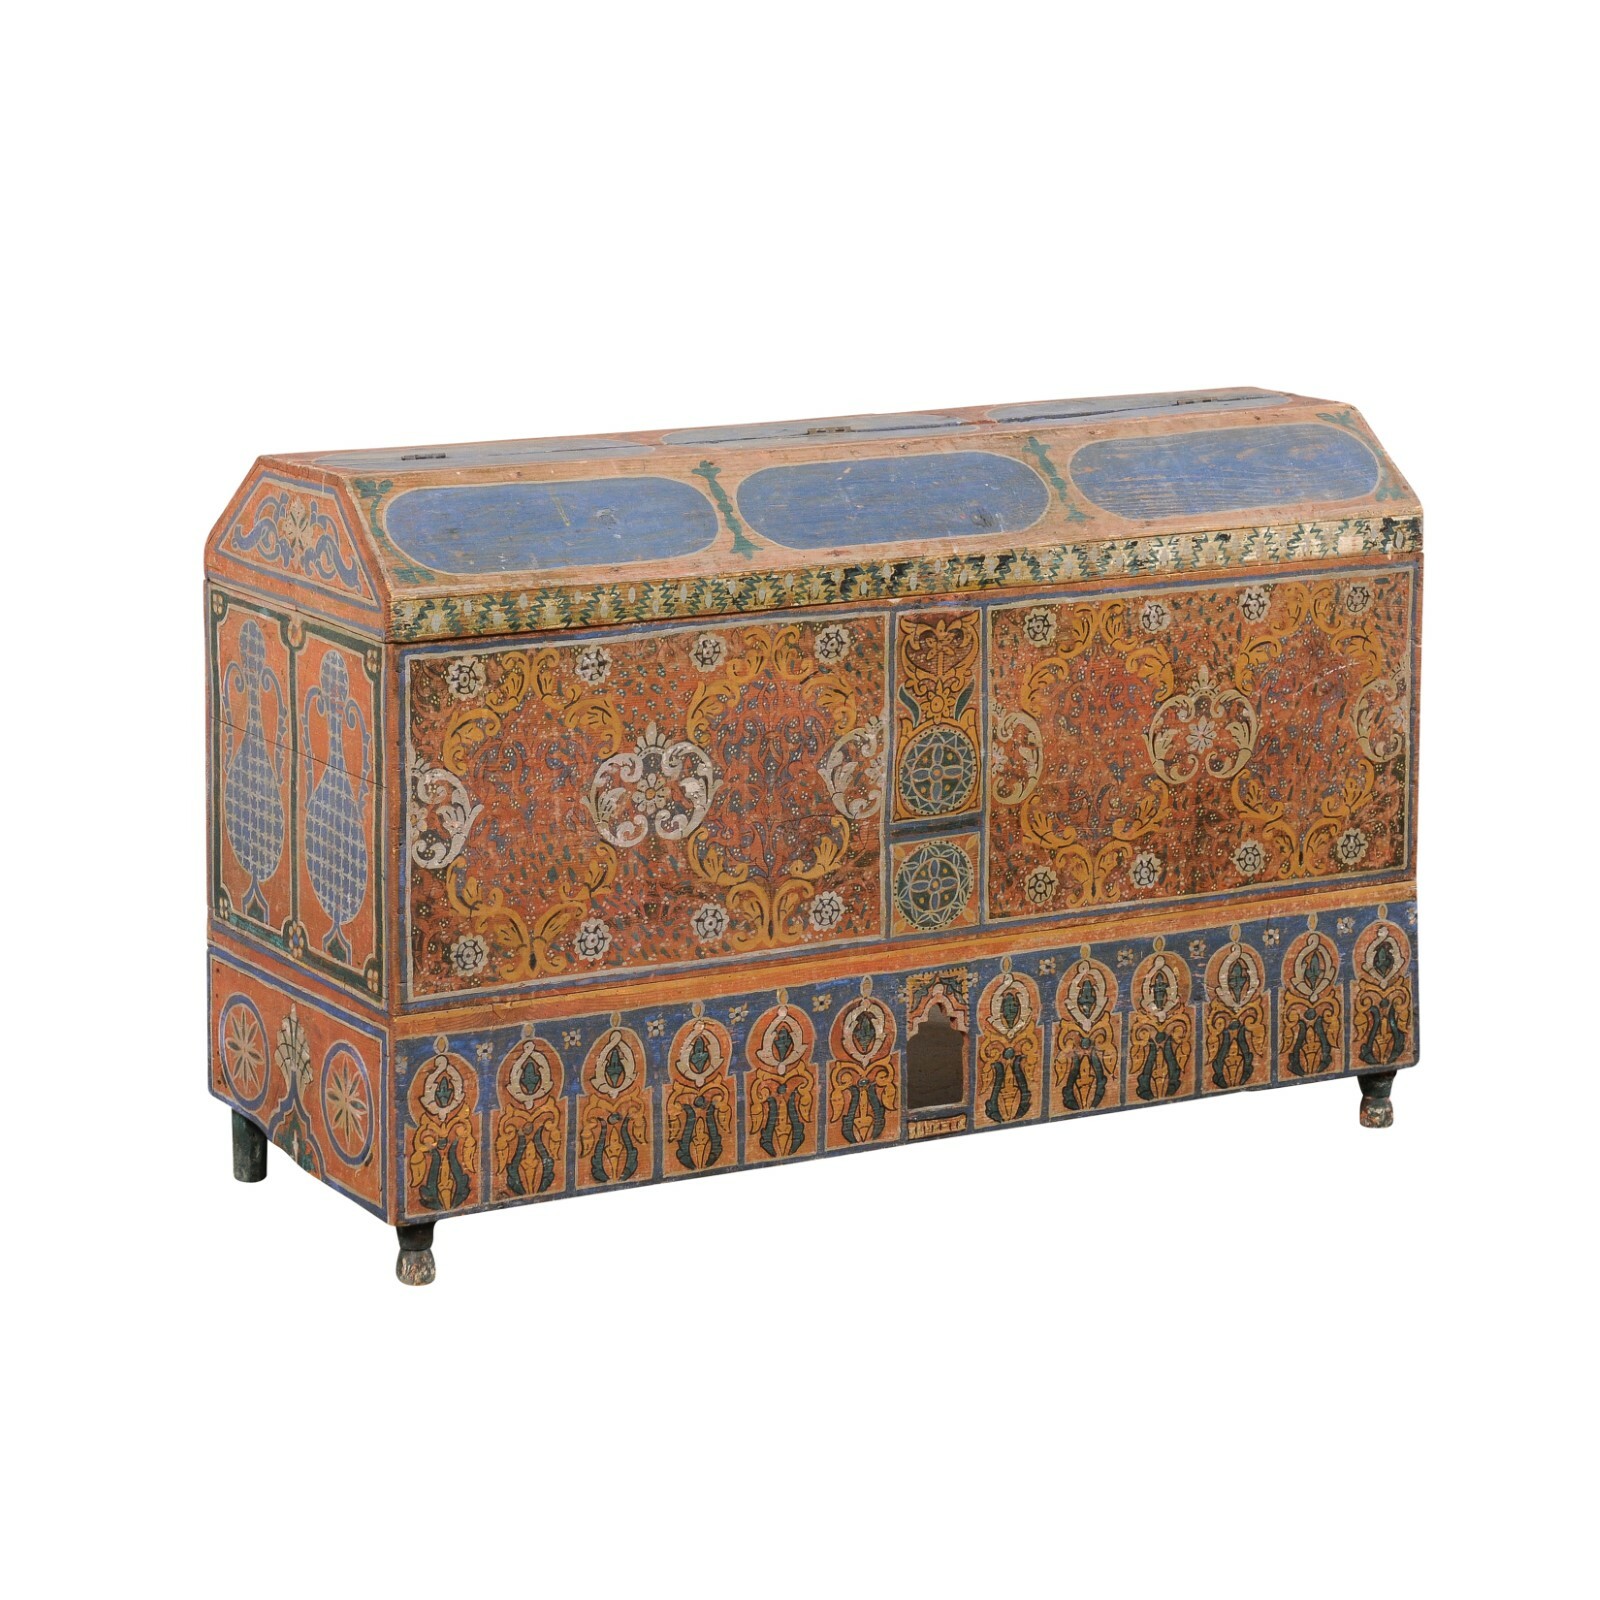 Moroccan Hand-Painted Trunk, Early 20th C.